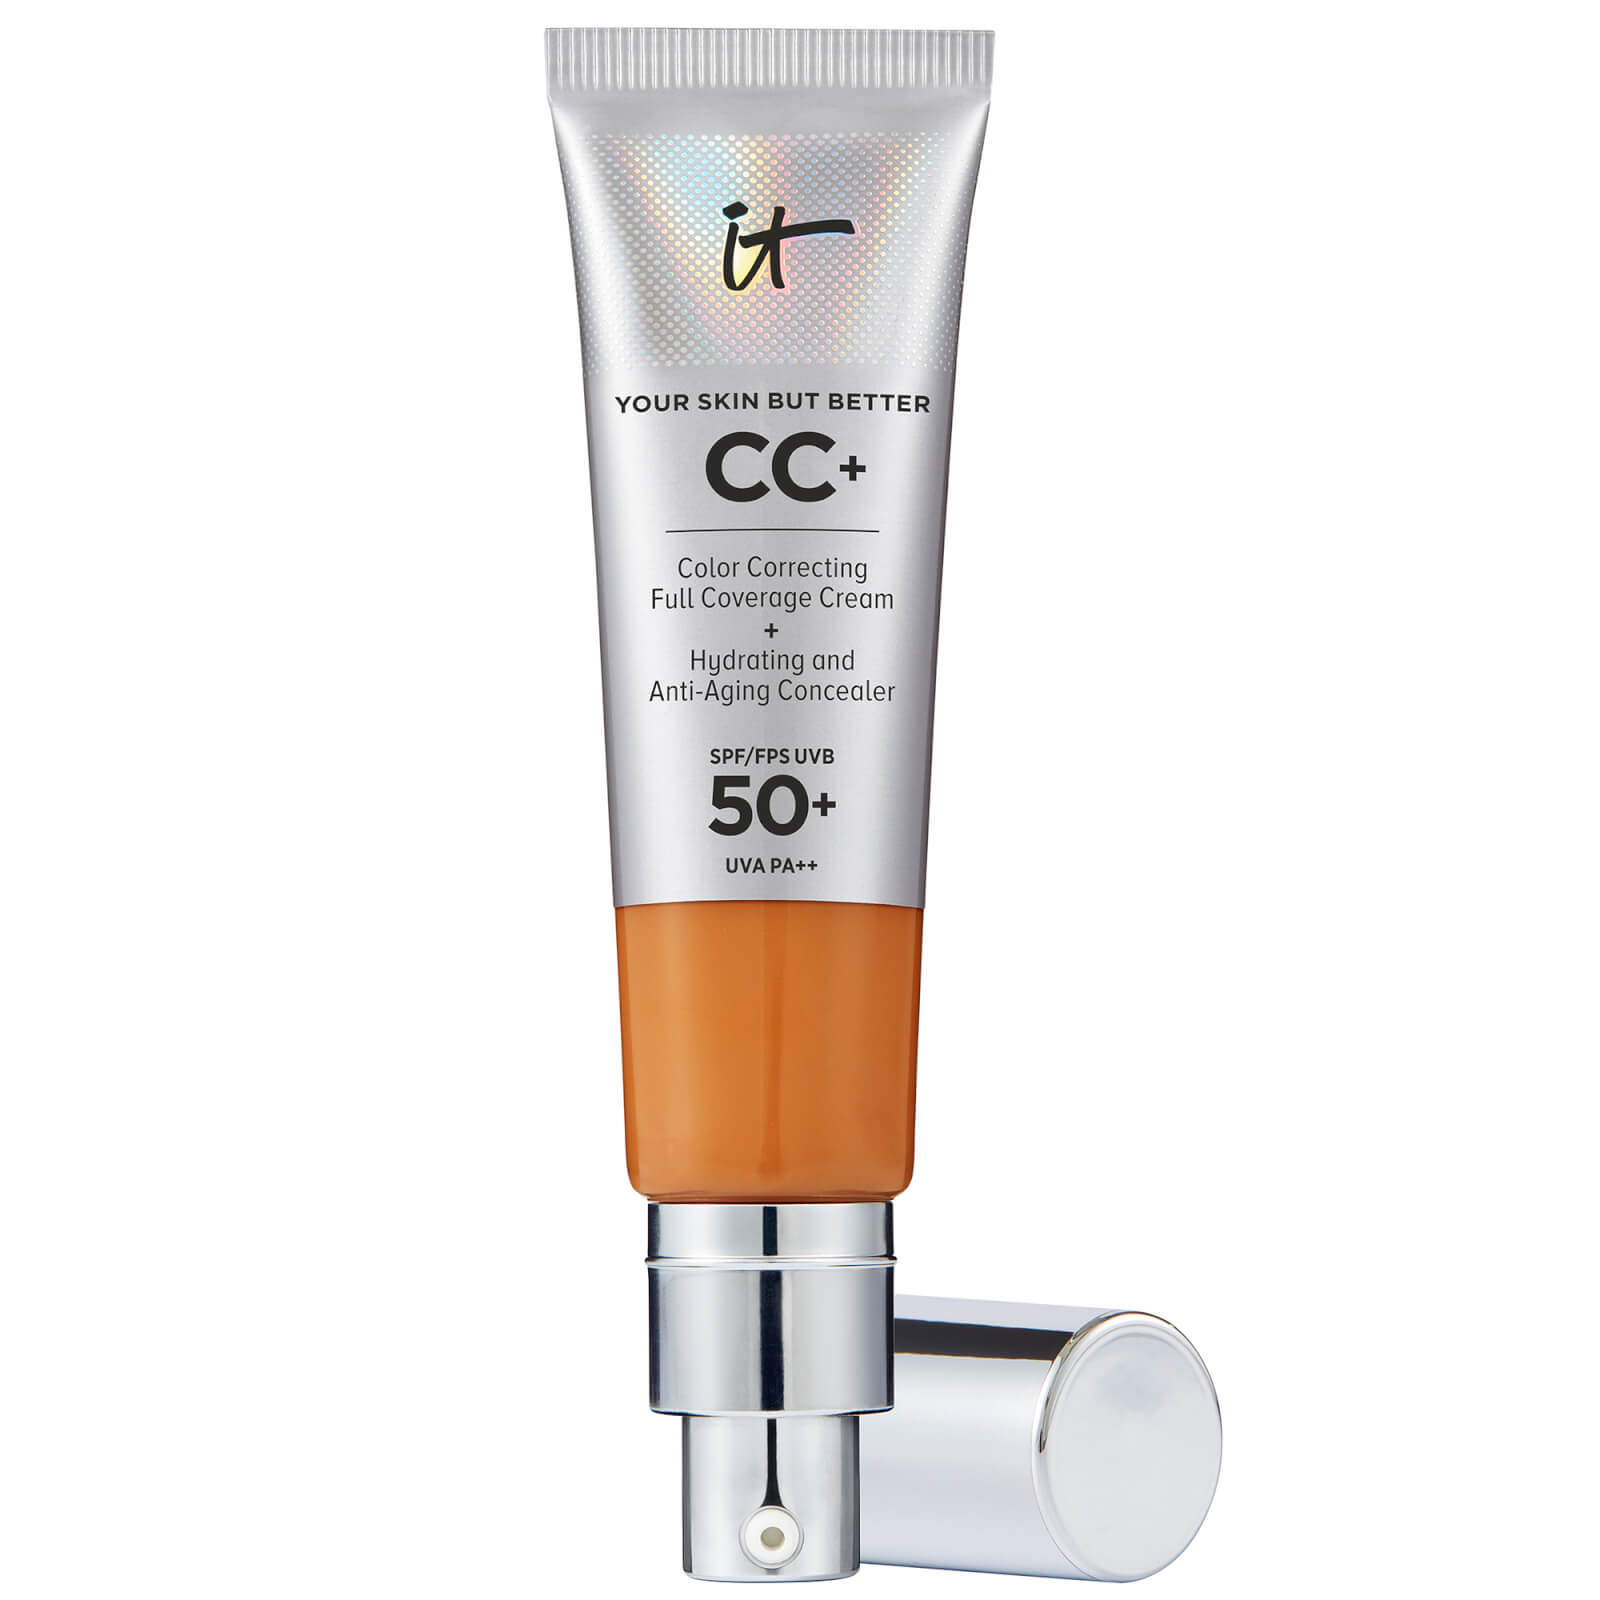 Image of IT Cosmetics Your Skin But Better CC+ Cream with SPF50 32ml (Various Shades) - Rich